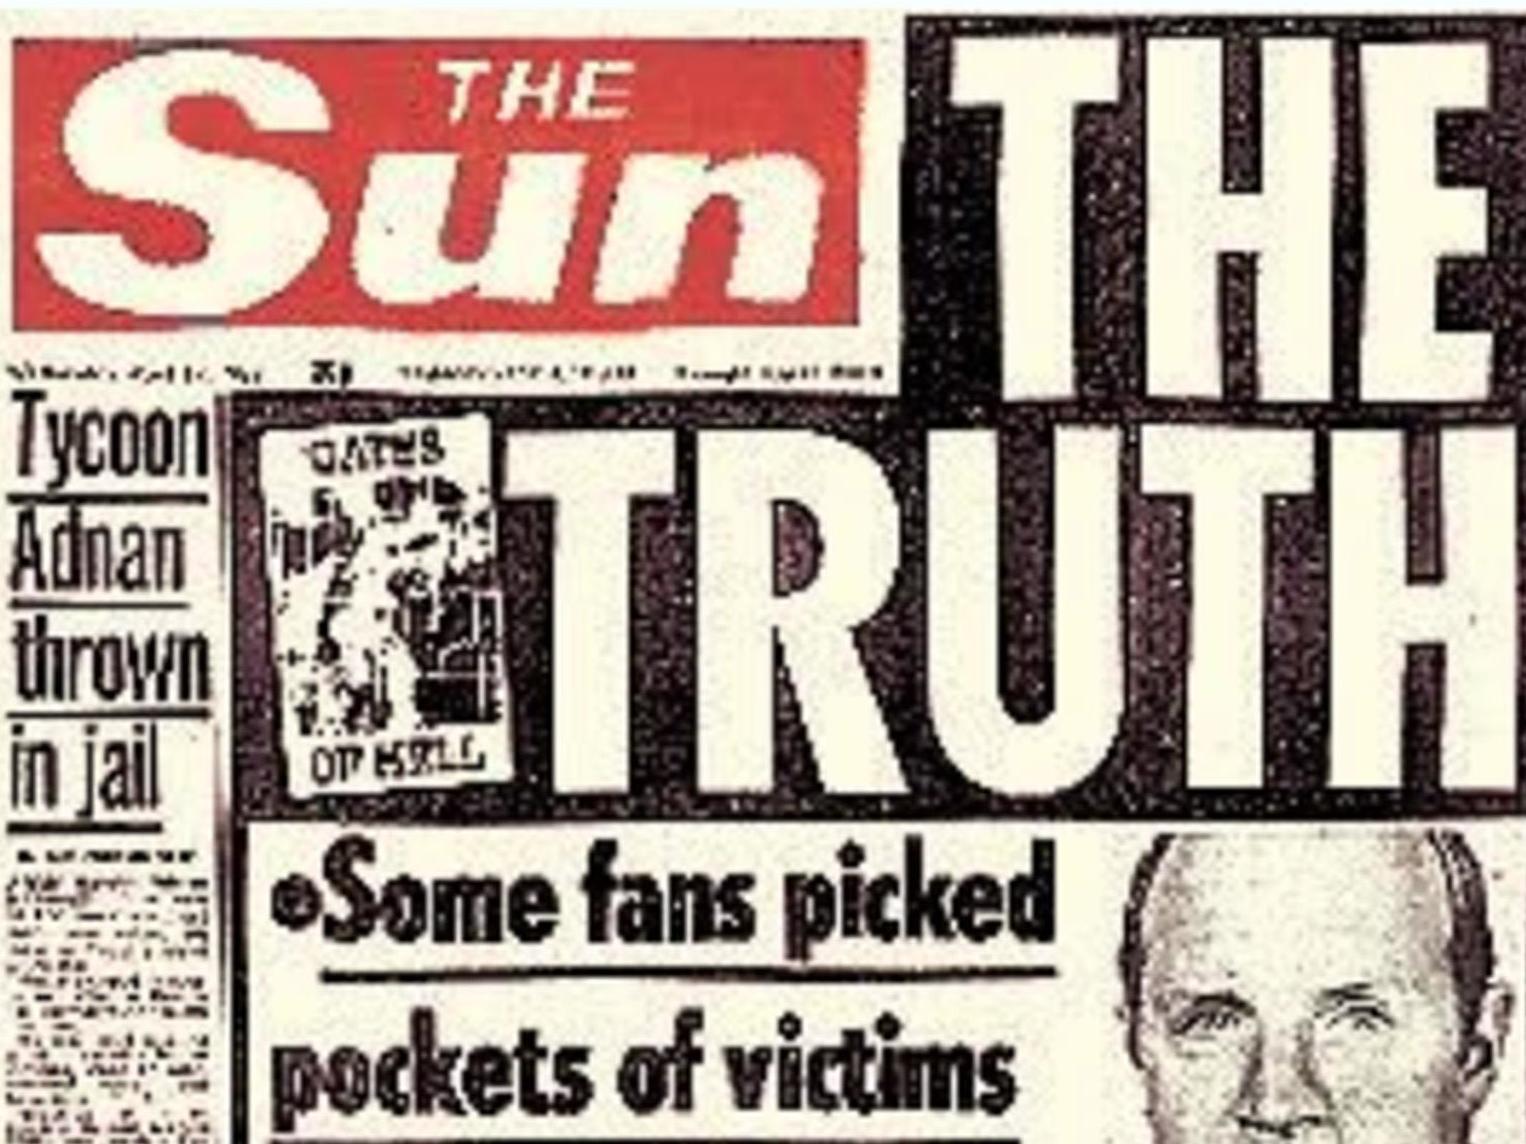 The Sun made scurrilous, irrational allegations about the disaster